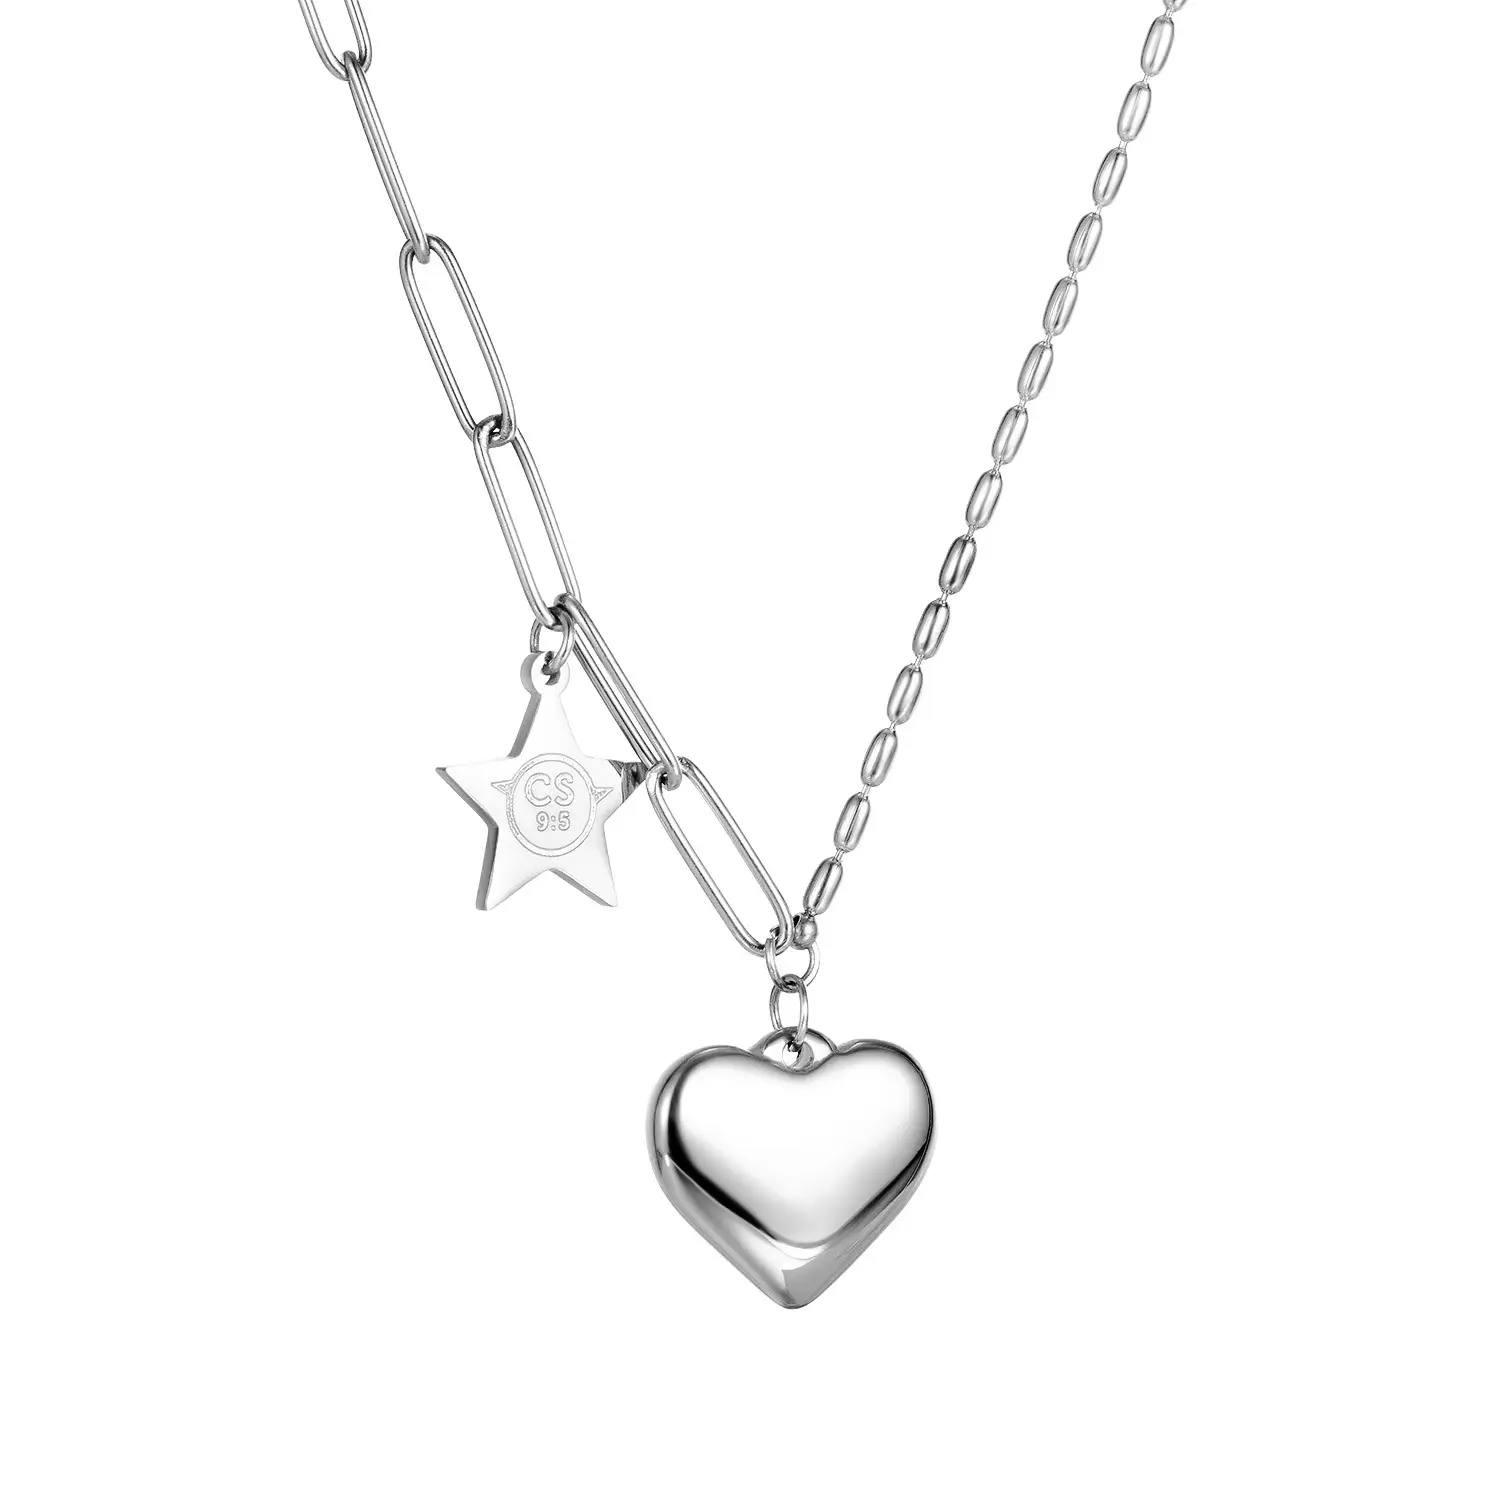 Retro Paperclip Chain Accessories Five-Pointed Star Pendant Choker Aesthetic Jewelry Stainless Steel Love Heart Locket Necklace